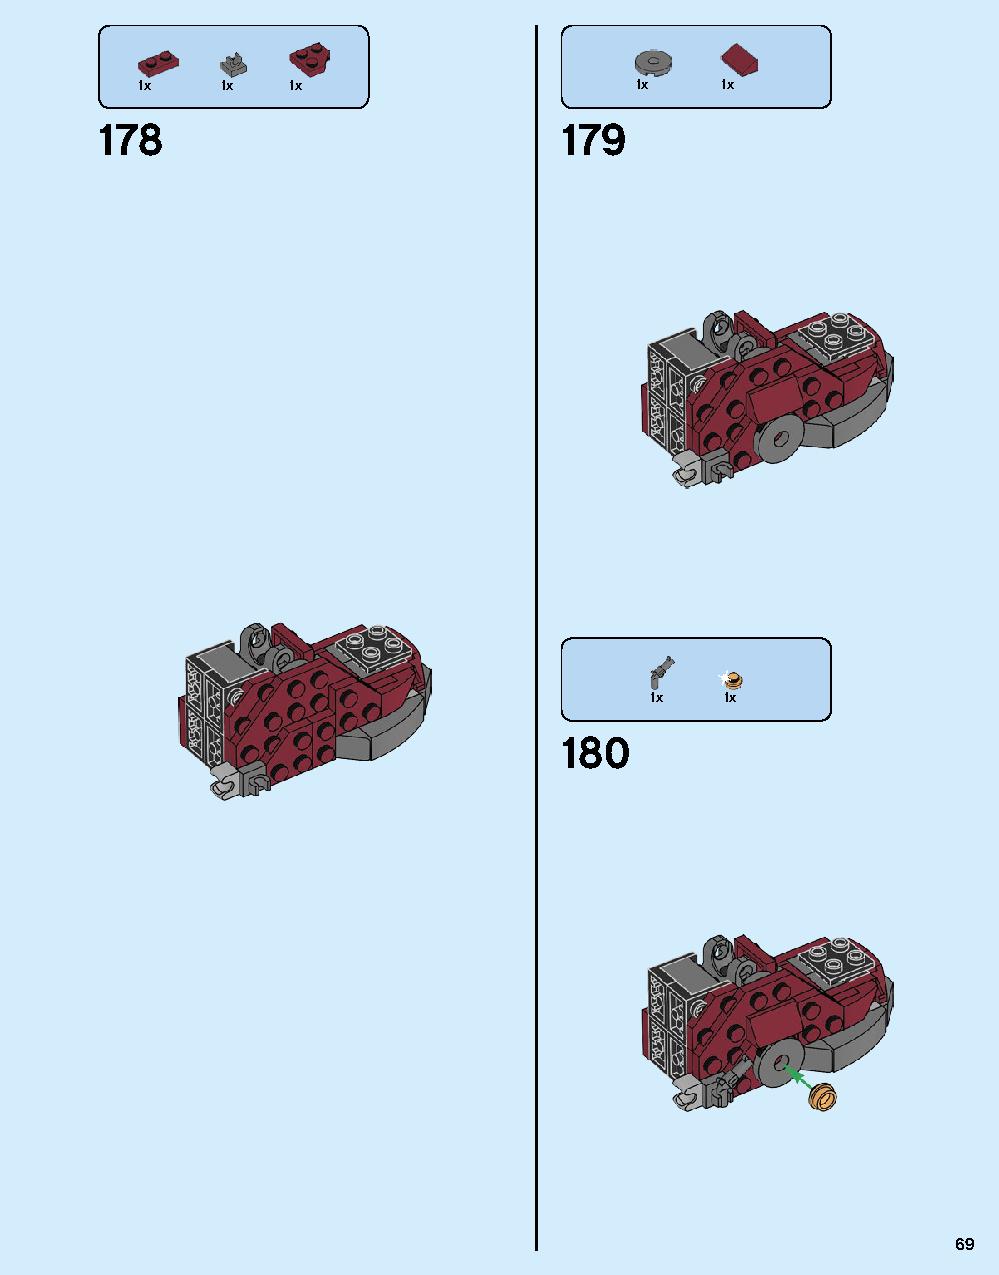 The Hulkbuster: Ultron Edition 76105 LEGO information LEGO instructions 69 page